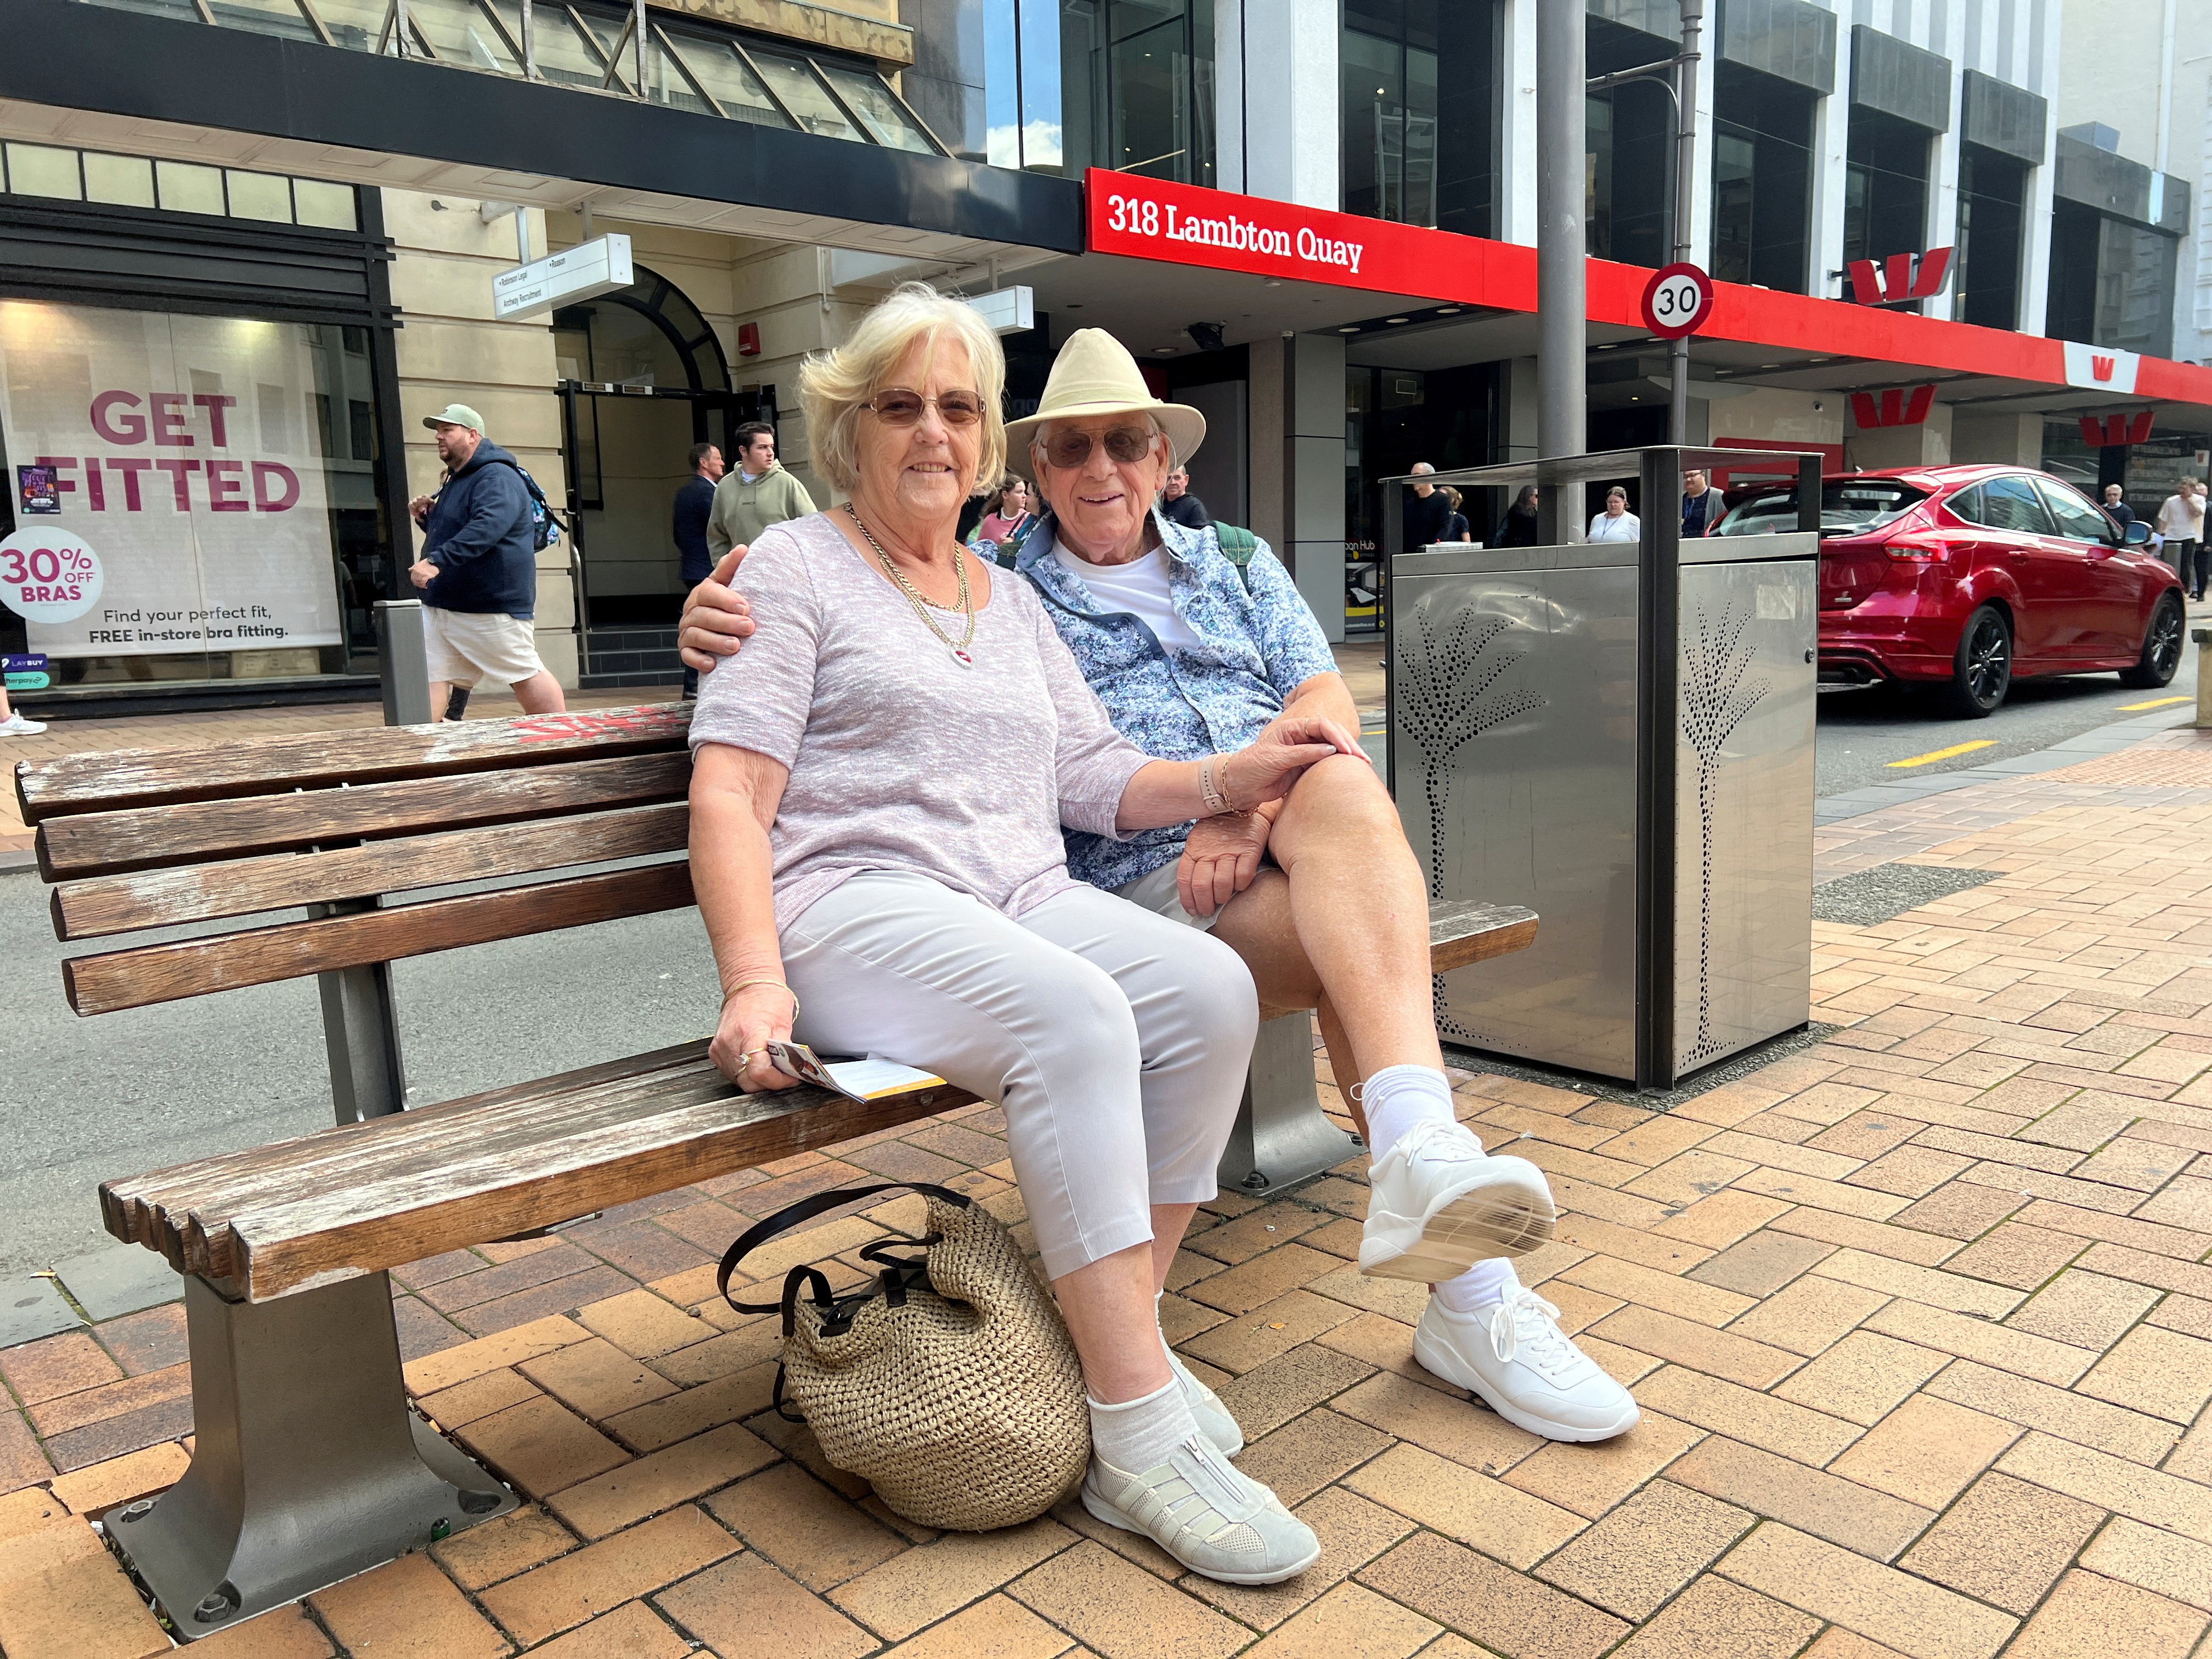 Australians Eunice and John Rowley, who are taking their first holiday in New Zealand, pose for an photo in Wellington